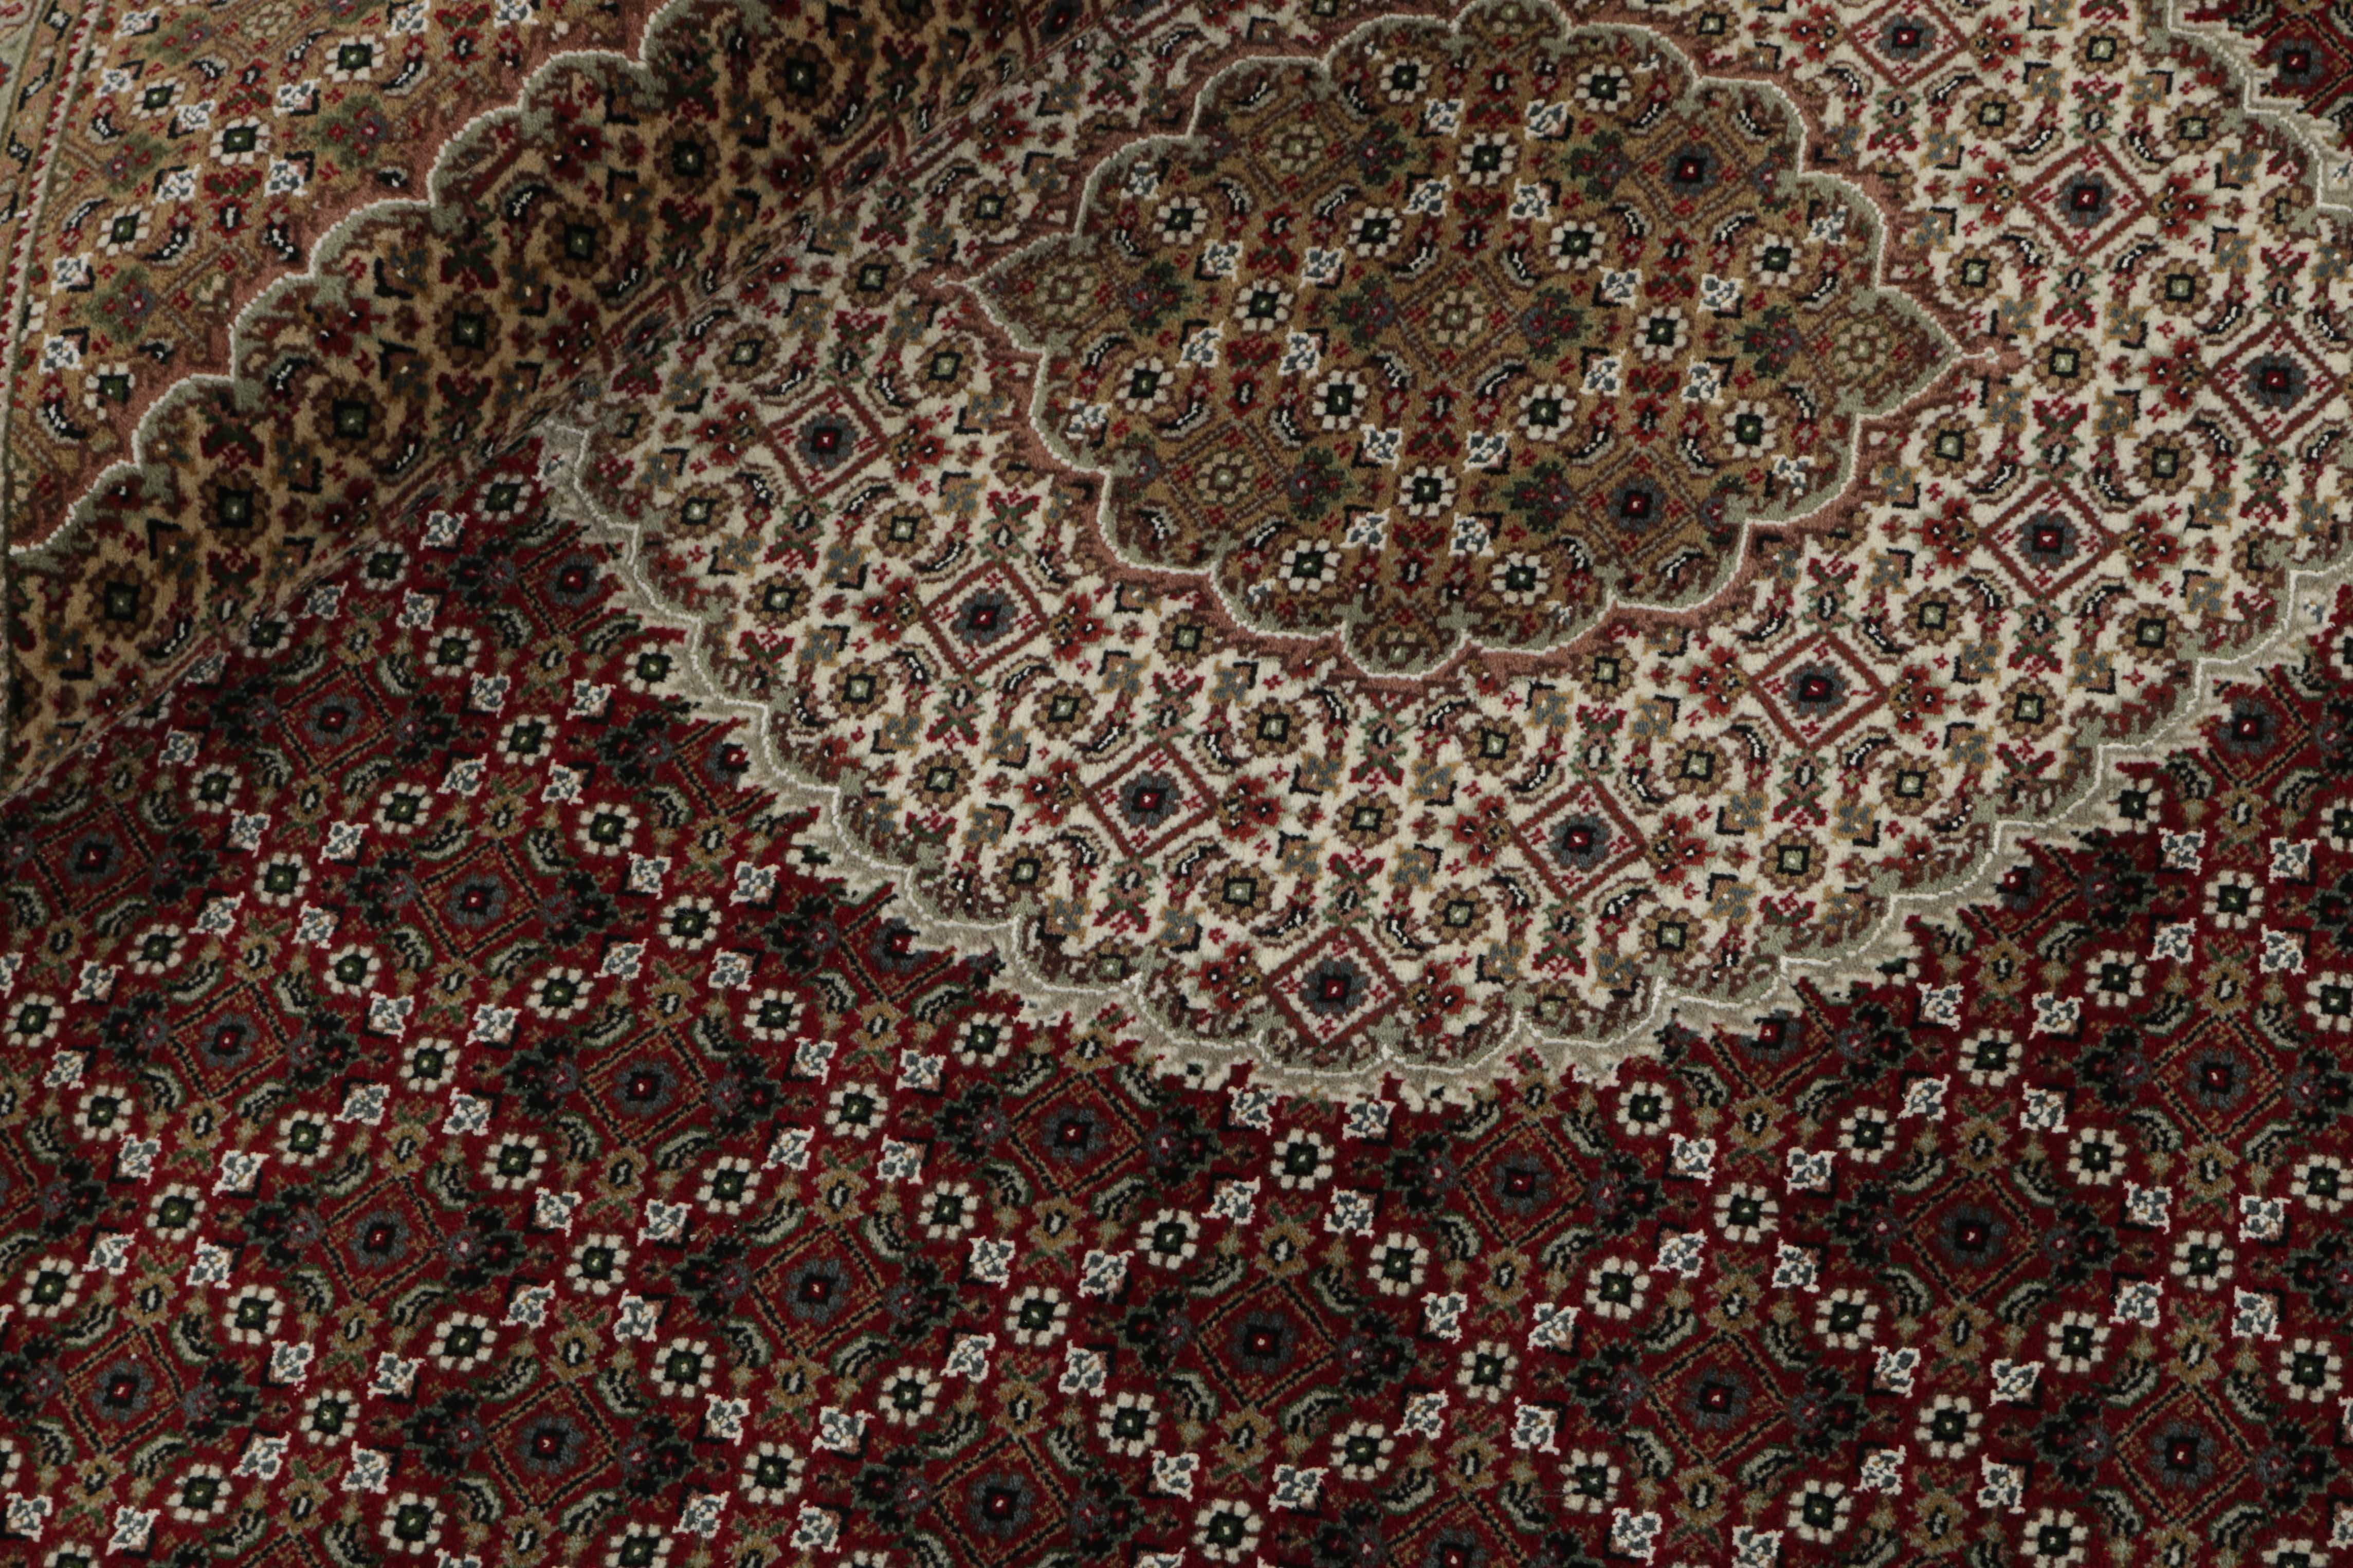 Authentic Oriental rug with traditional geometric and floral design in grey